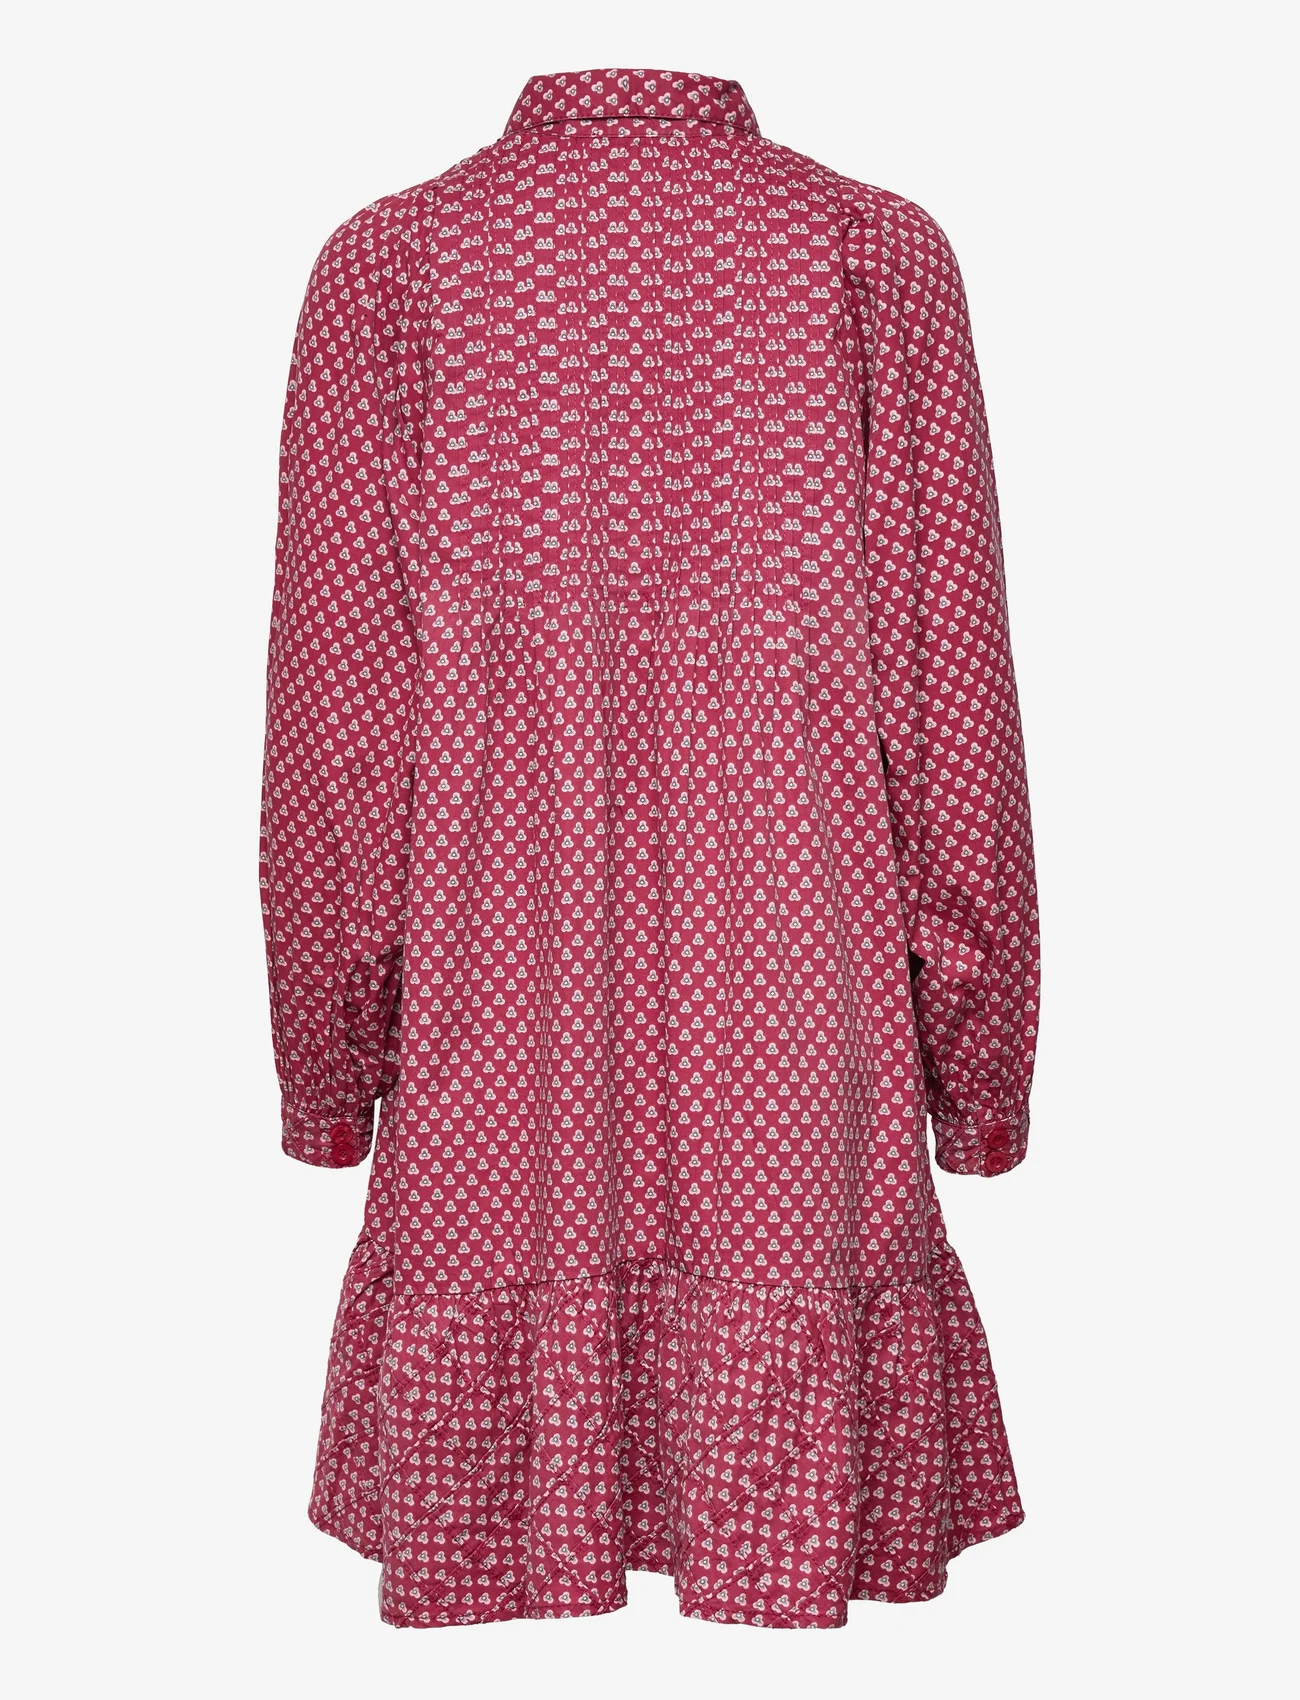 by Ti Mo - Structured Cotton Shift Dress - blousejurken - floral dots - 1